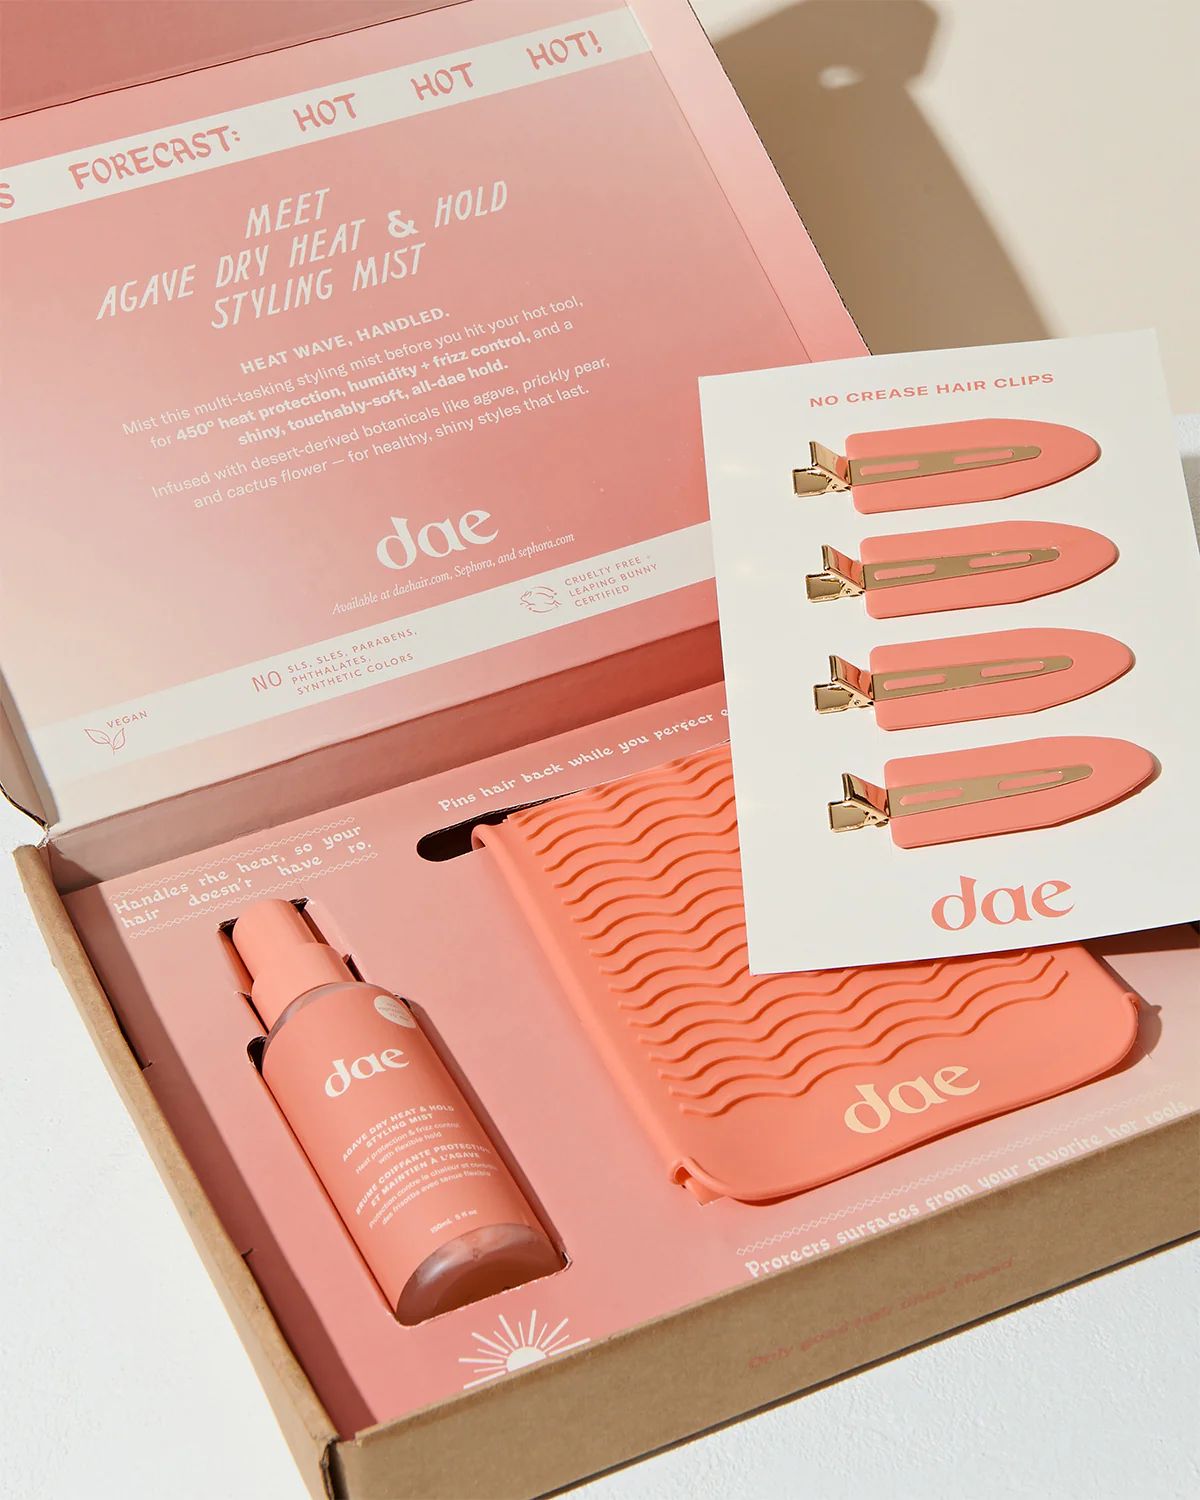 Agave Dry Heat Limited Edition Styling Kit | Dae Hair